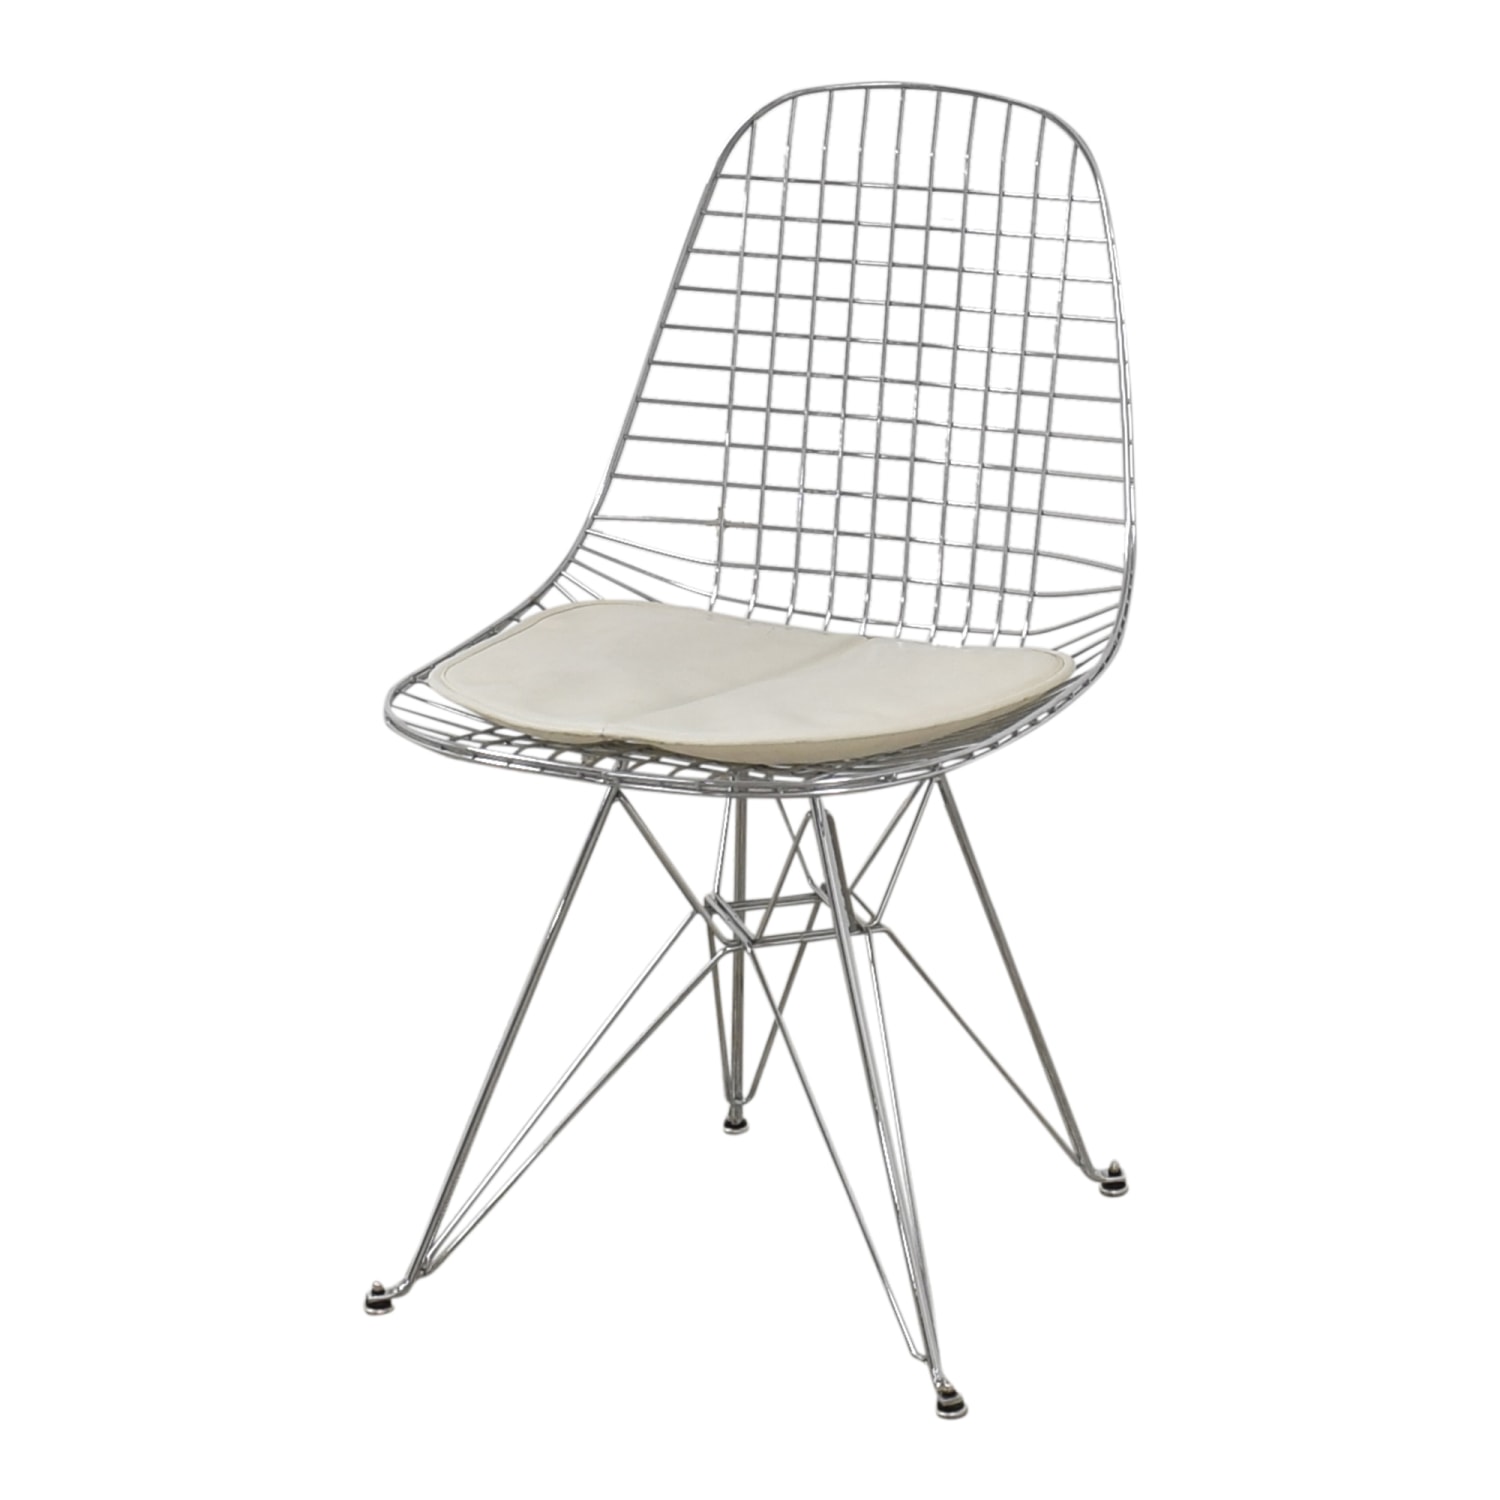 Modernica Case Study Wire Eiffel Chairs with Seat Pads / Chairs